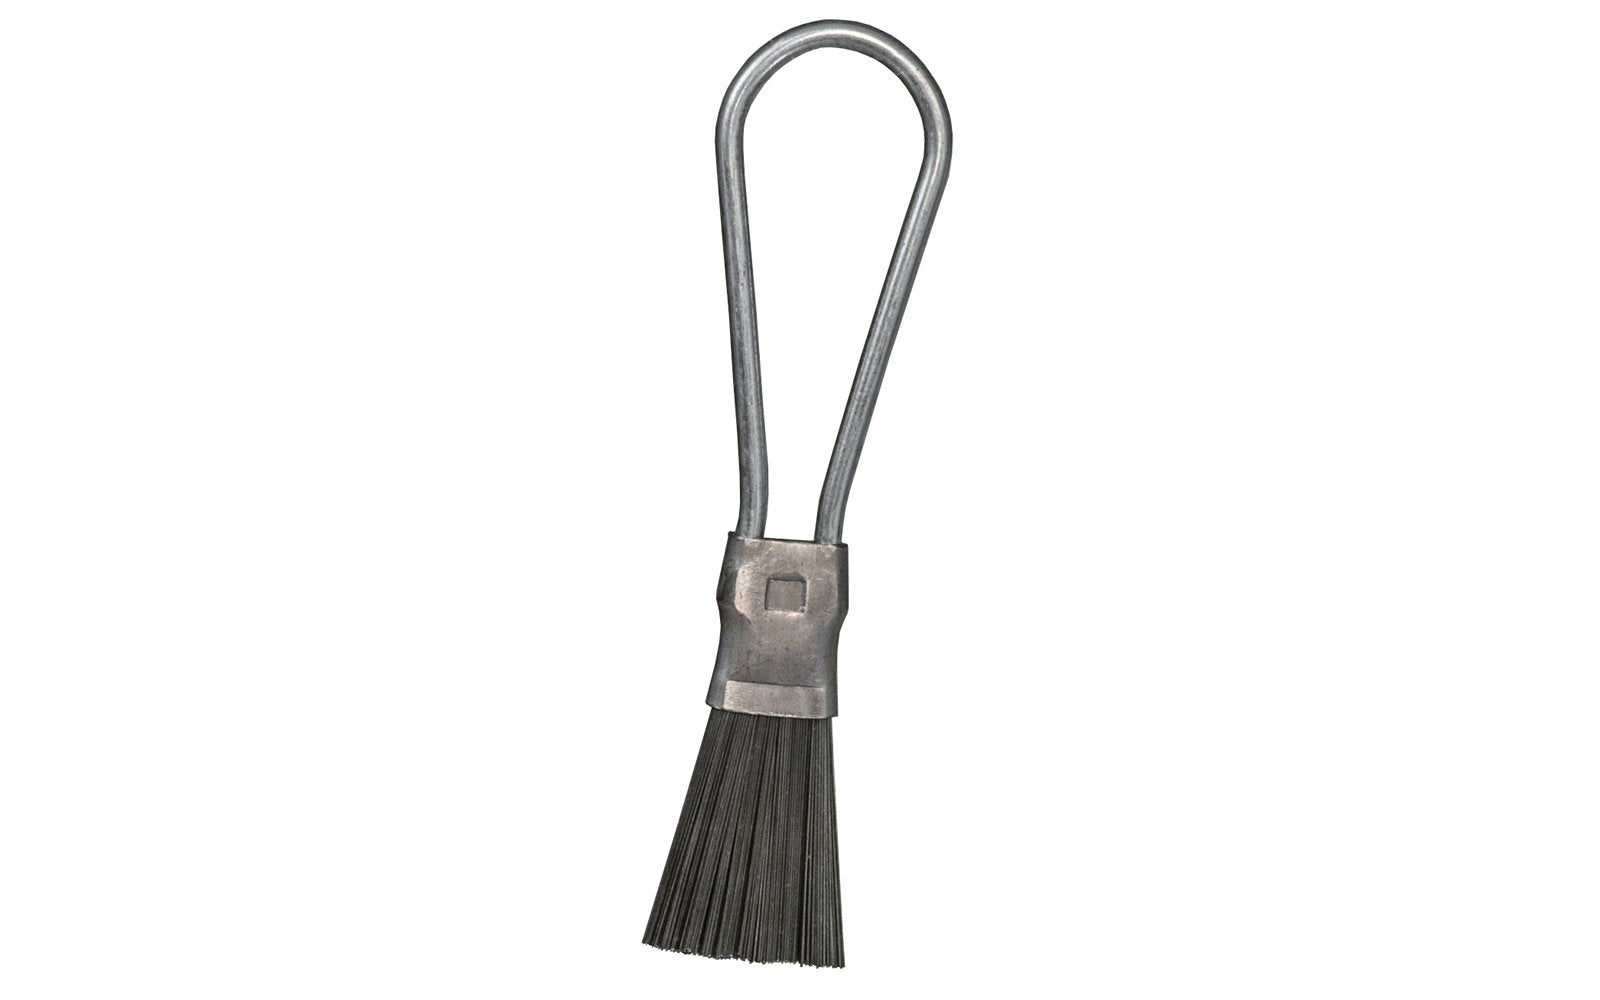 Steel Looped-Handle Wire Brush ~ 5-3/8" Long - Made in USA ~ This wire brush is good for general purpose & the workshop area, including industrial, automotive & construction applications - Steel wire brush - 5-3/8" overall long - 1-1/4" width of bristles - Hang-up loop on wire brush - Wire Brush with Loop - Model 20-S - Magnolia Brush